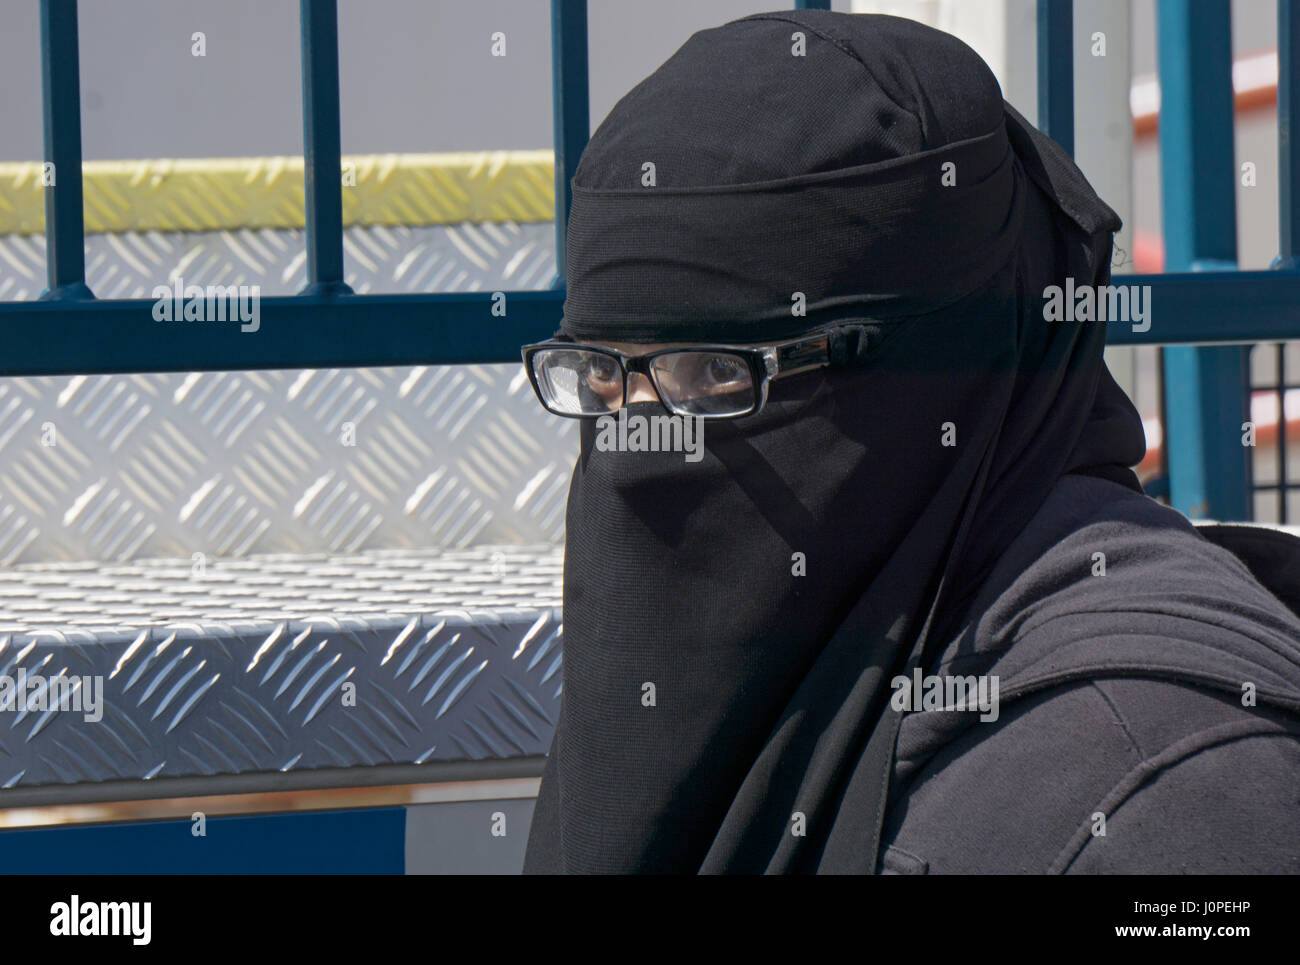 An Islamic woman in a burka with only her eyes and glasses showing at Luna Park in Coney Island, Brooklyn, New York City. Stock Photo